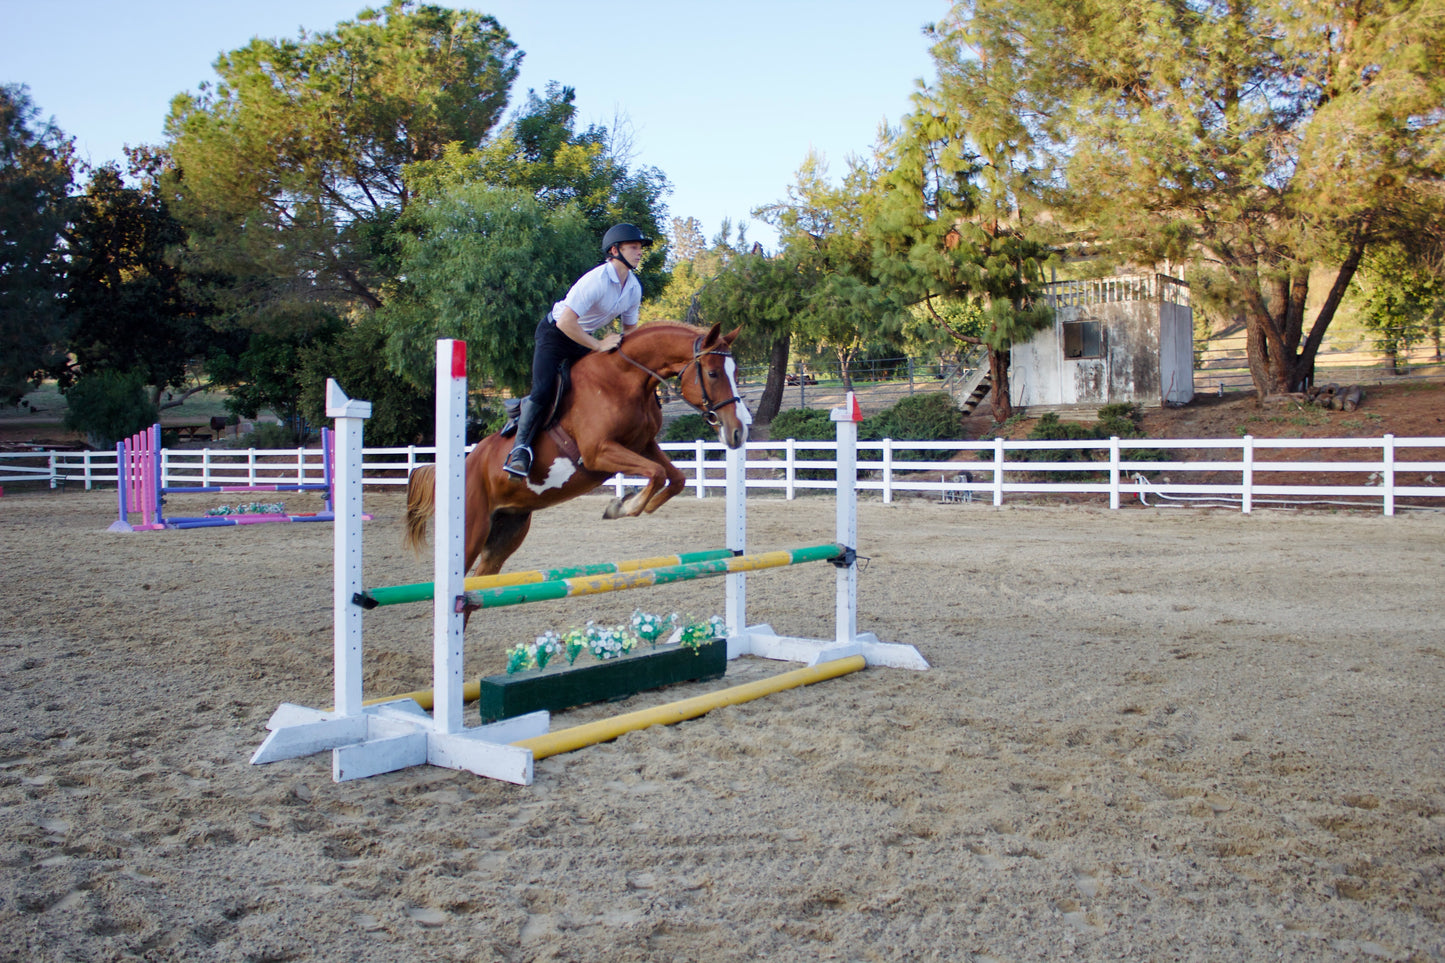 Horseback Riding in Agoura Hills! Trail Ride or Private Lessons Plus $20 Gift Card Just $67 at Horsemanship Redefined. (Value $145) All Levels! May Buy Three Per Person.